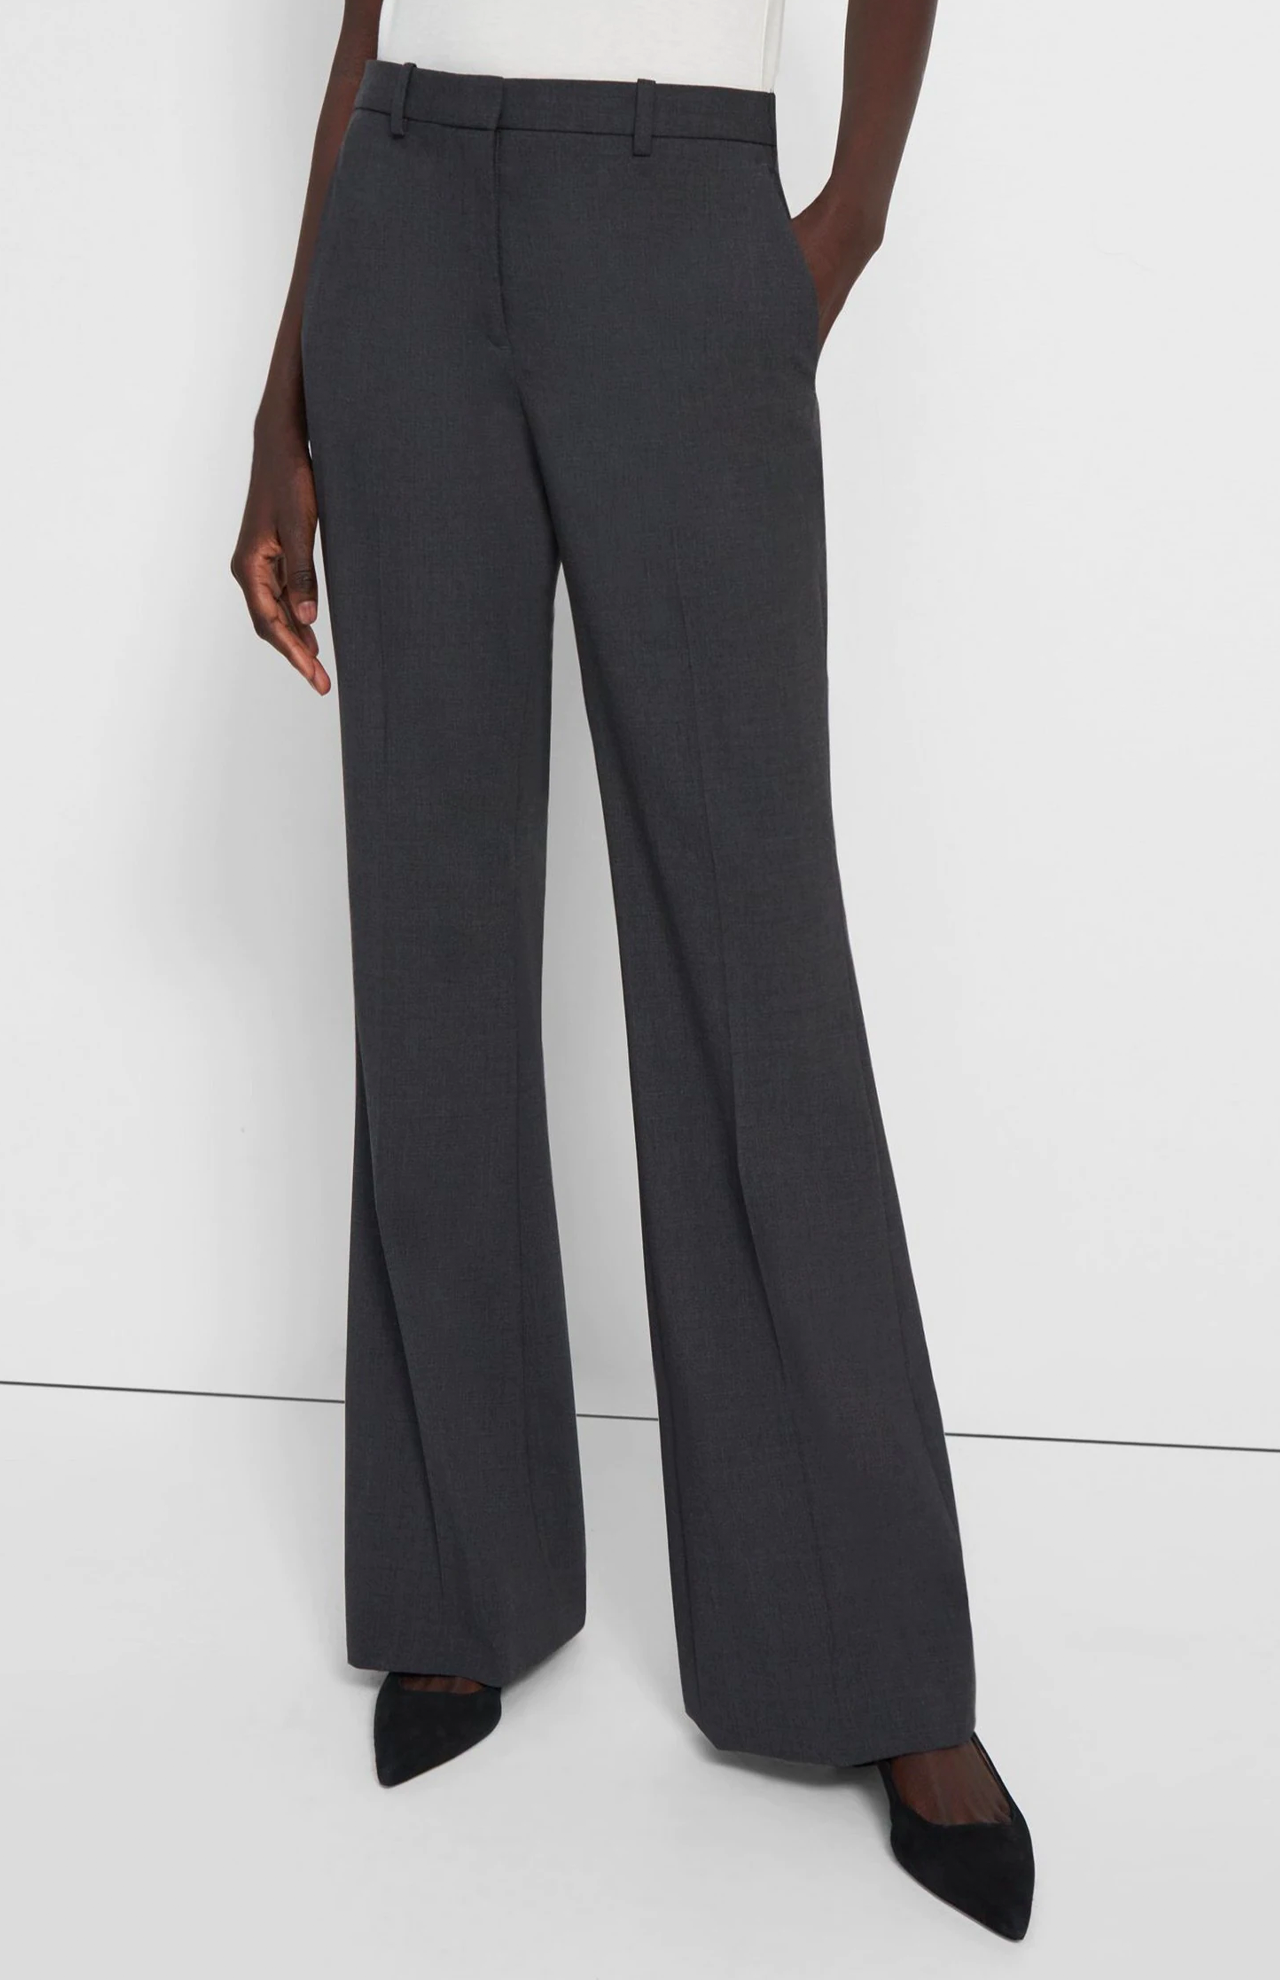 Theory Demitria Pants for Women - Up to 75% off